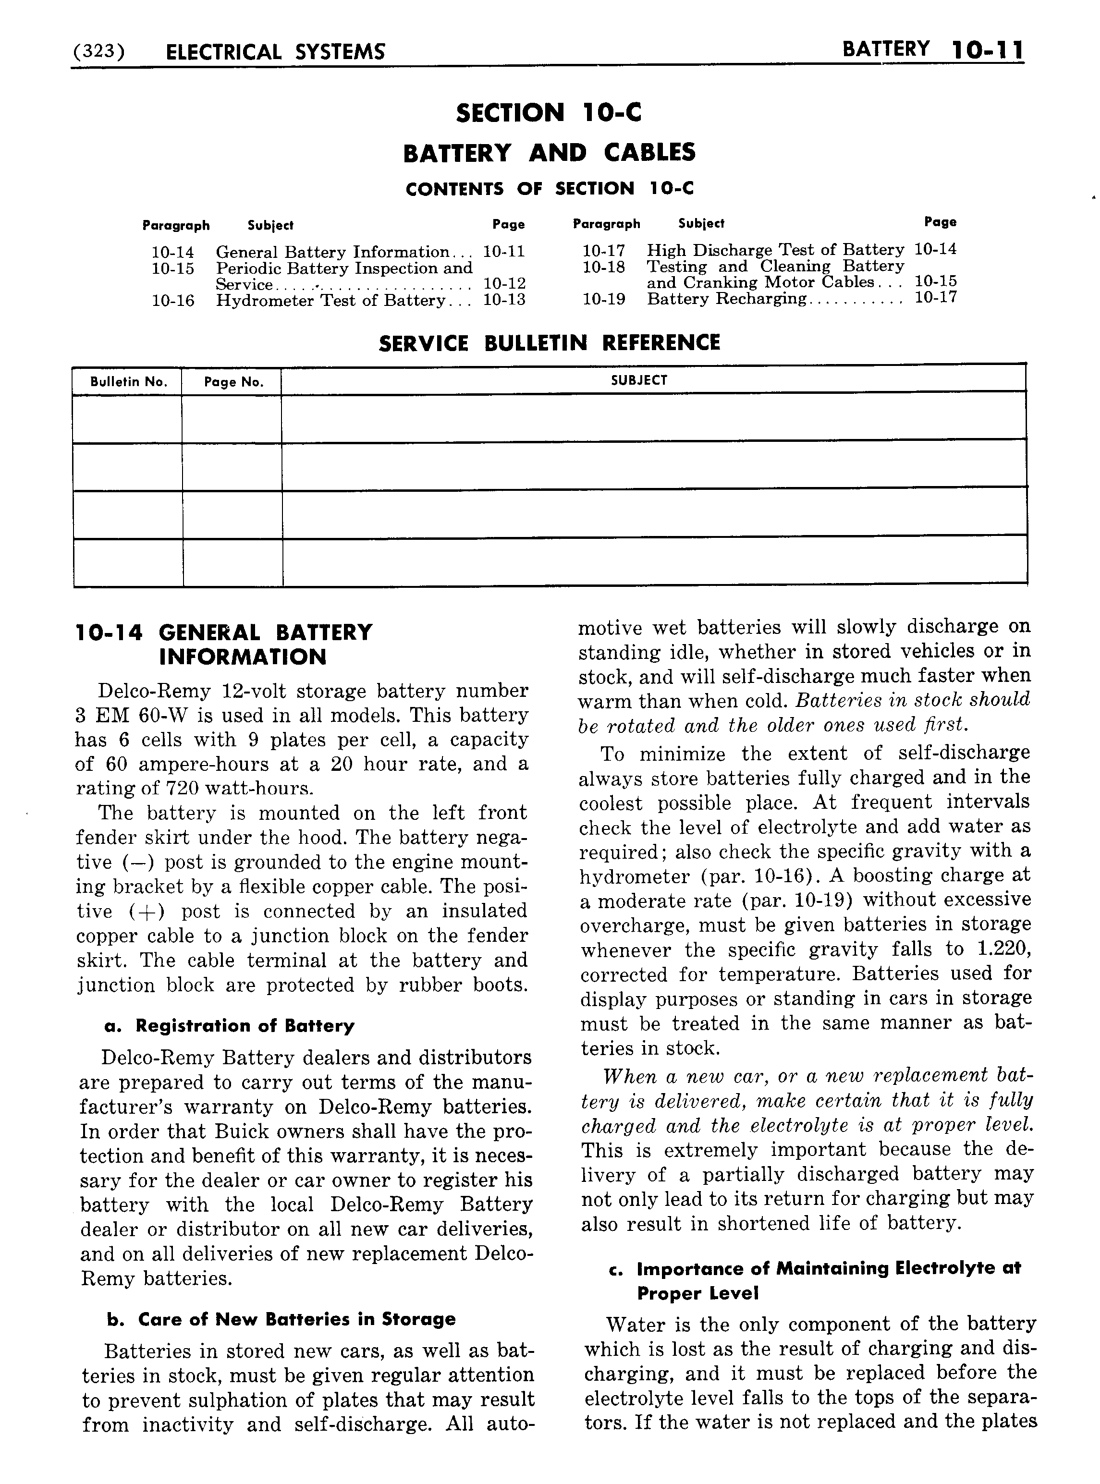 n_11 1954 Buick Shop Manual - Electrical Systems-011-011.jpg